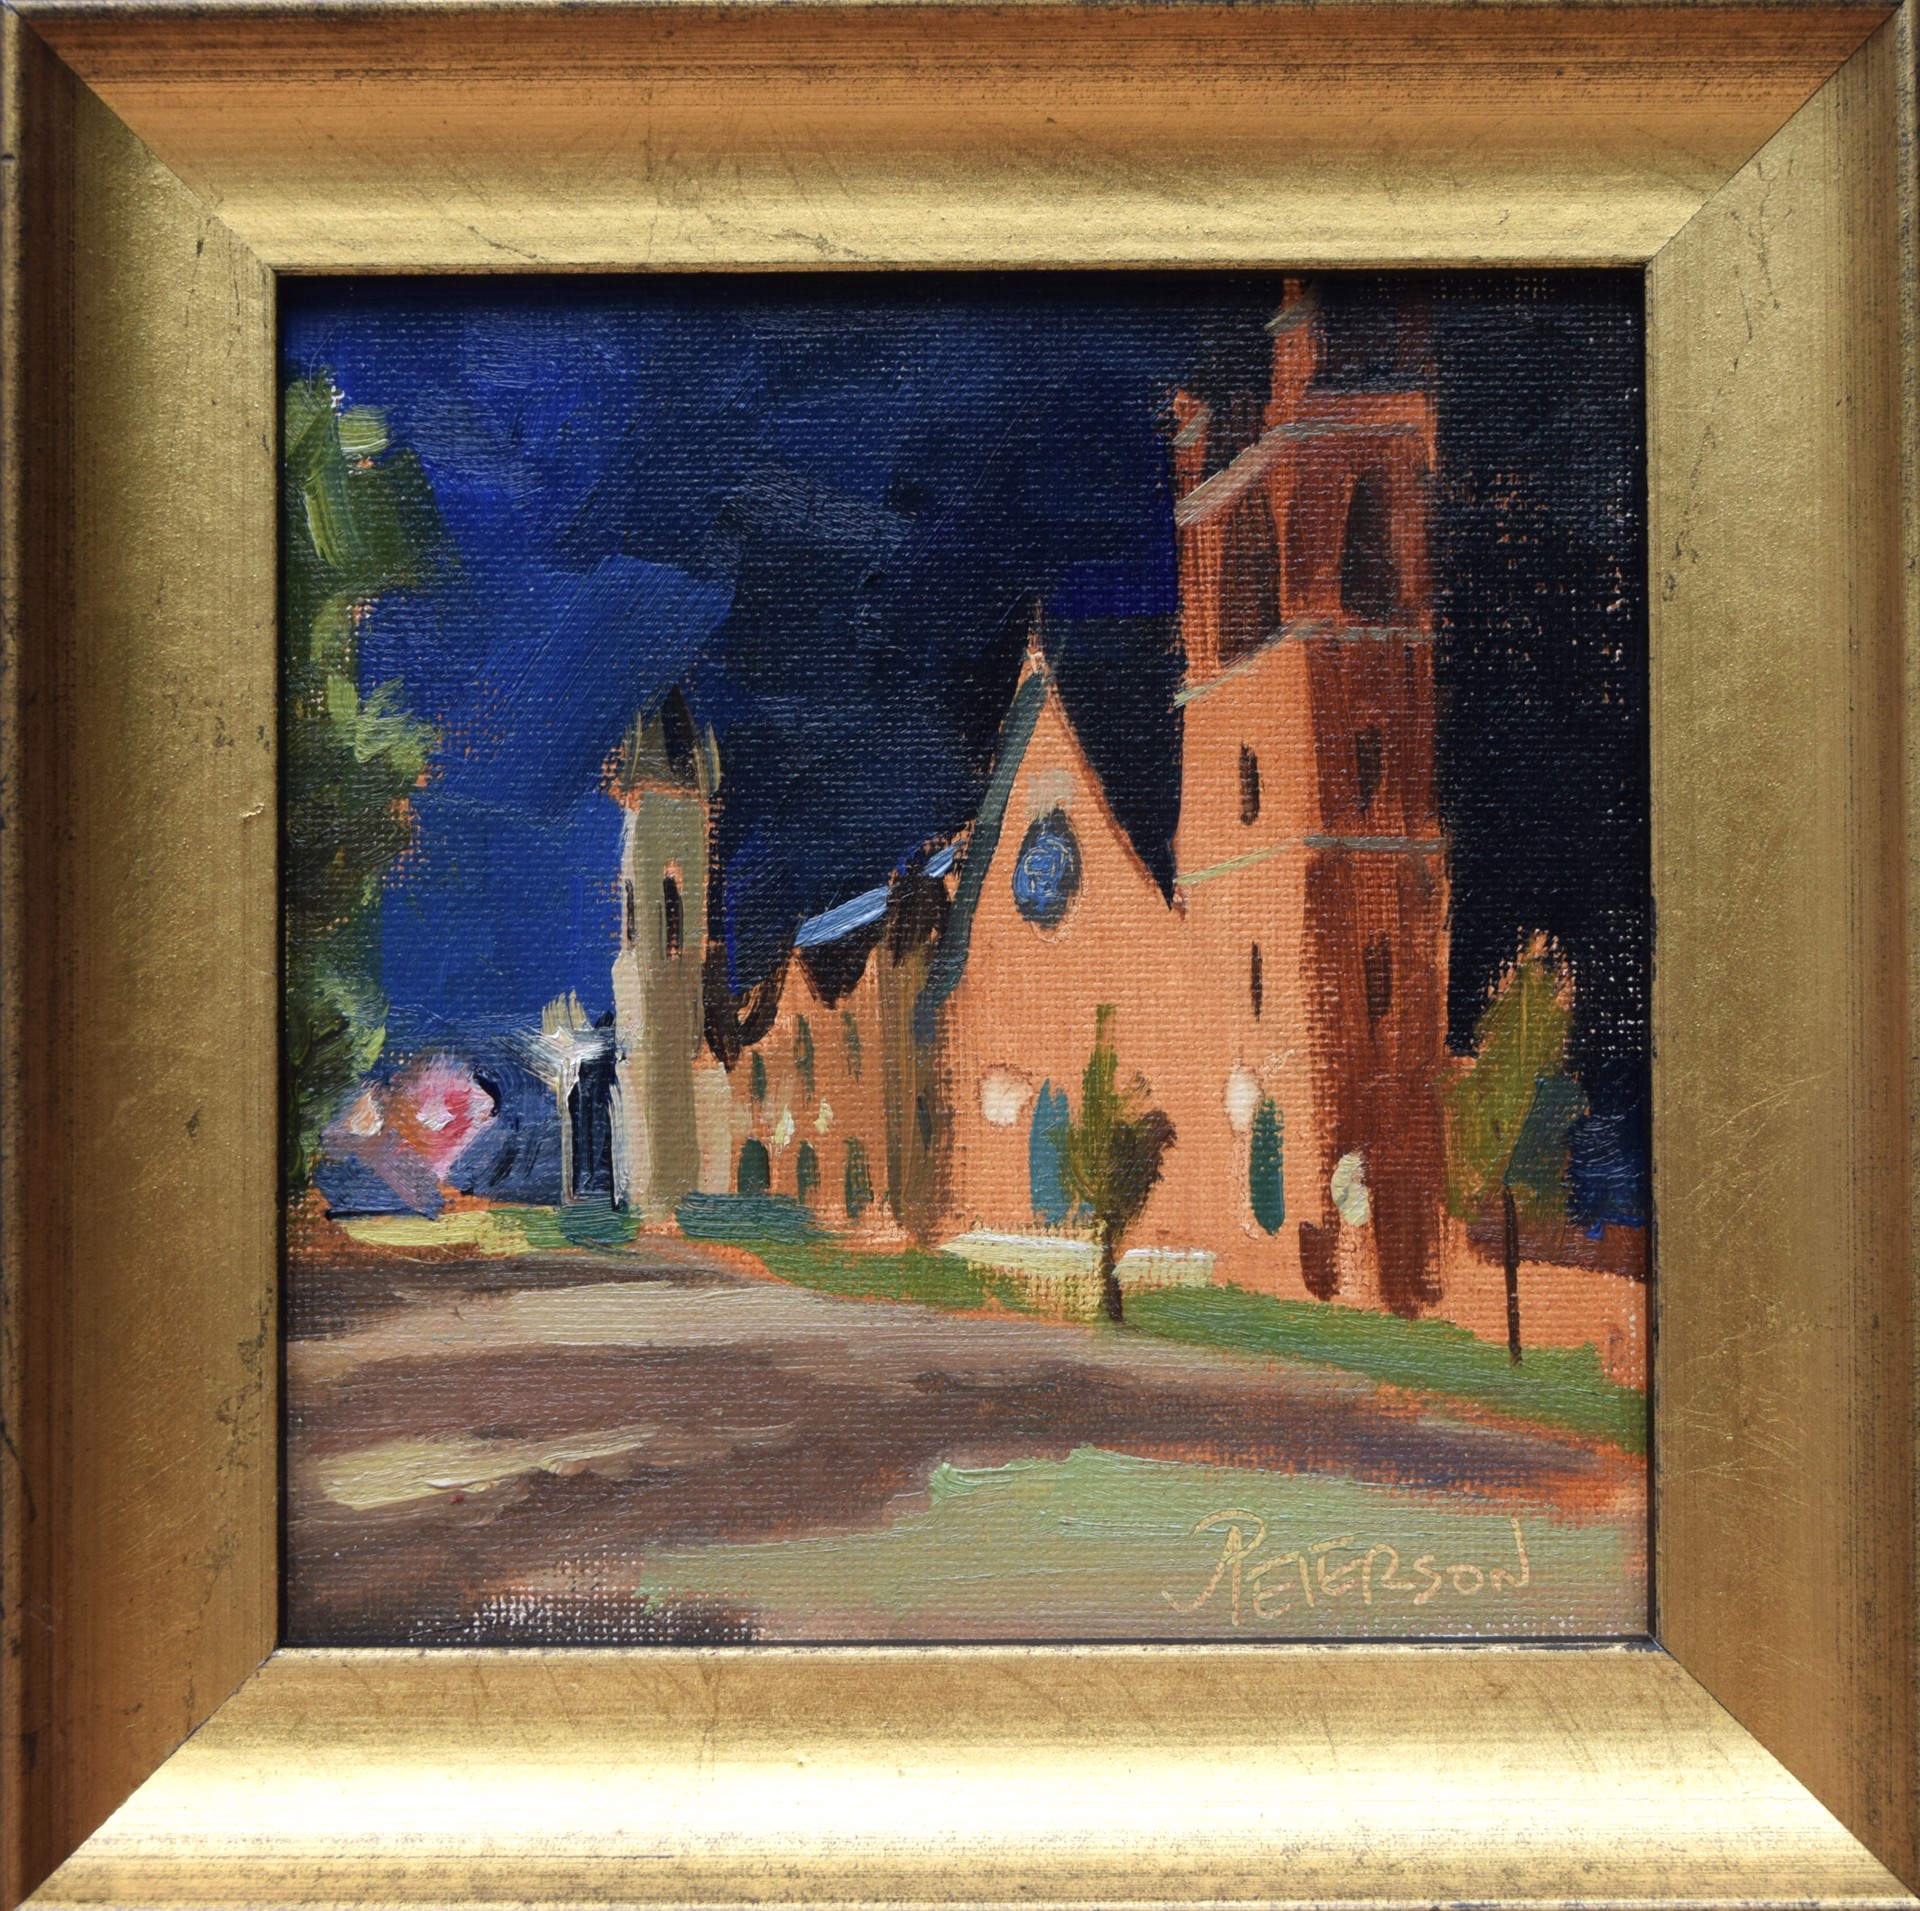 Church Street, Selma Nocturne by Amy R. Peterson